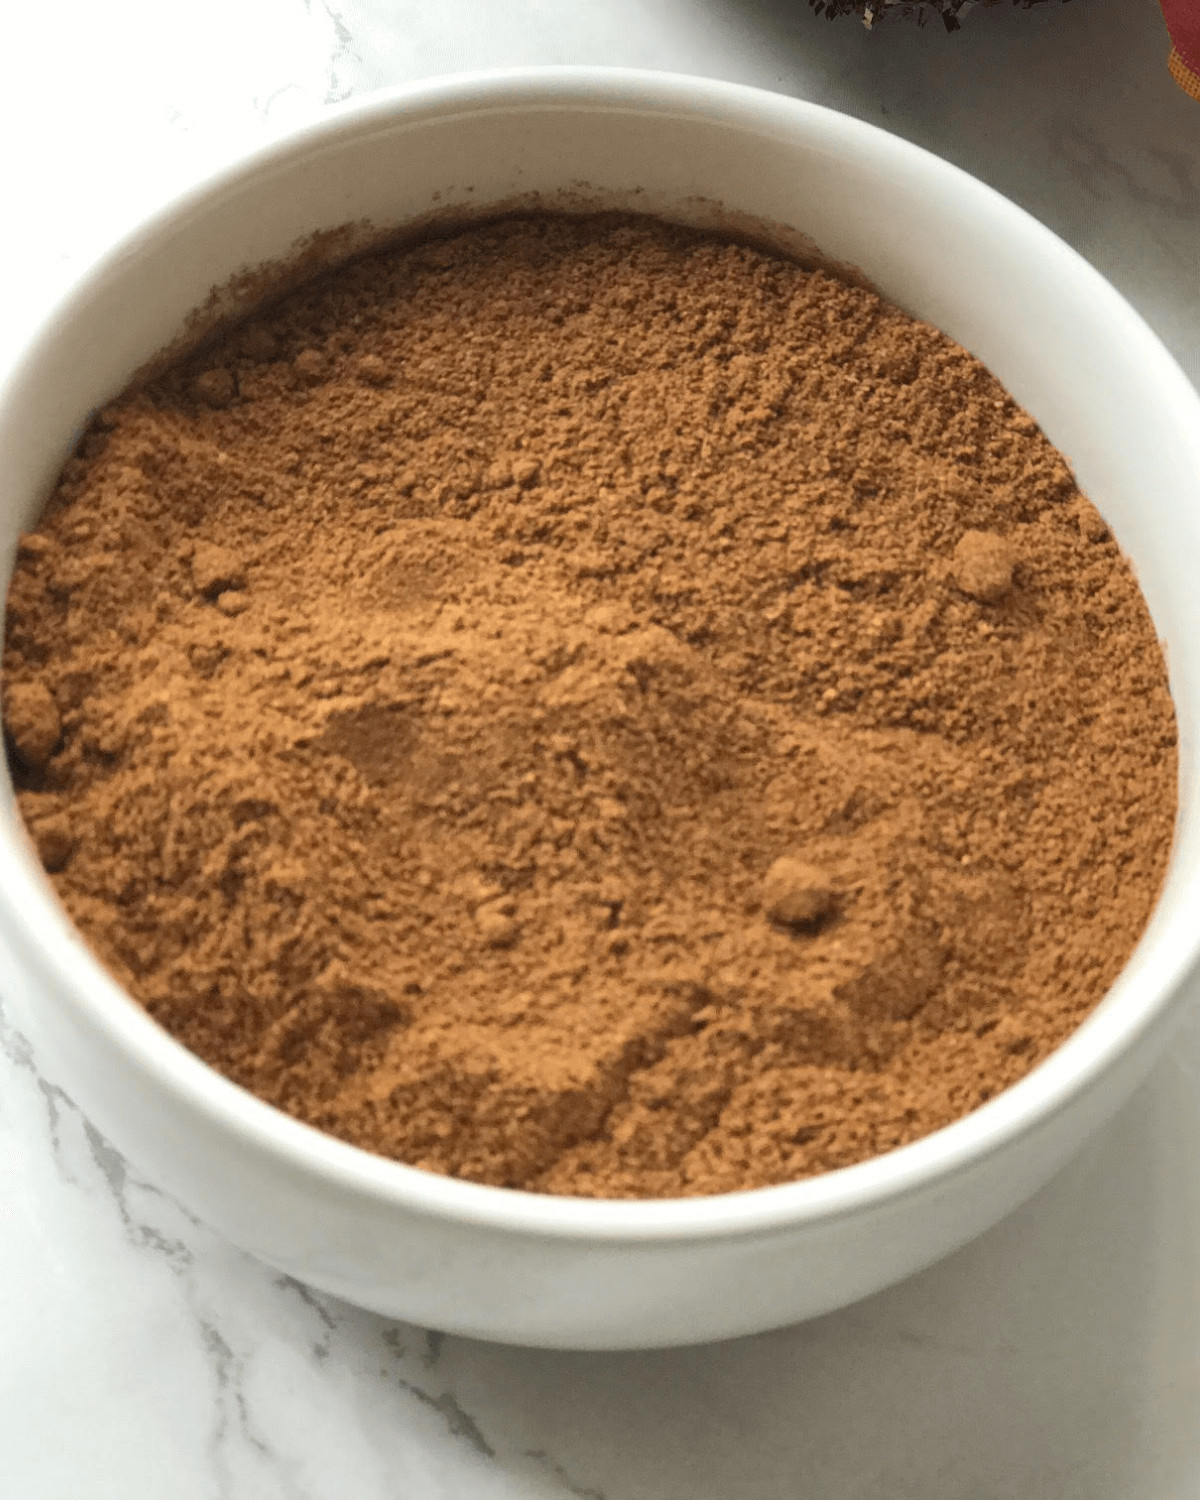 A top shot of the McCormick Pumpkin Pie Spice Substitute.